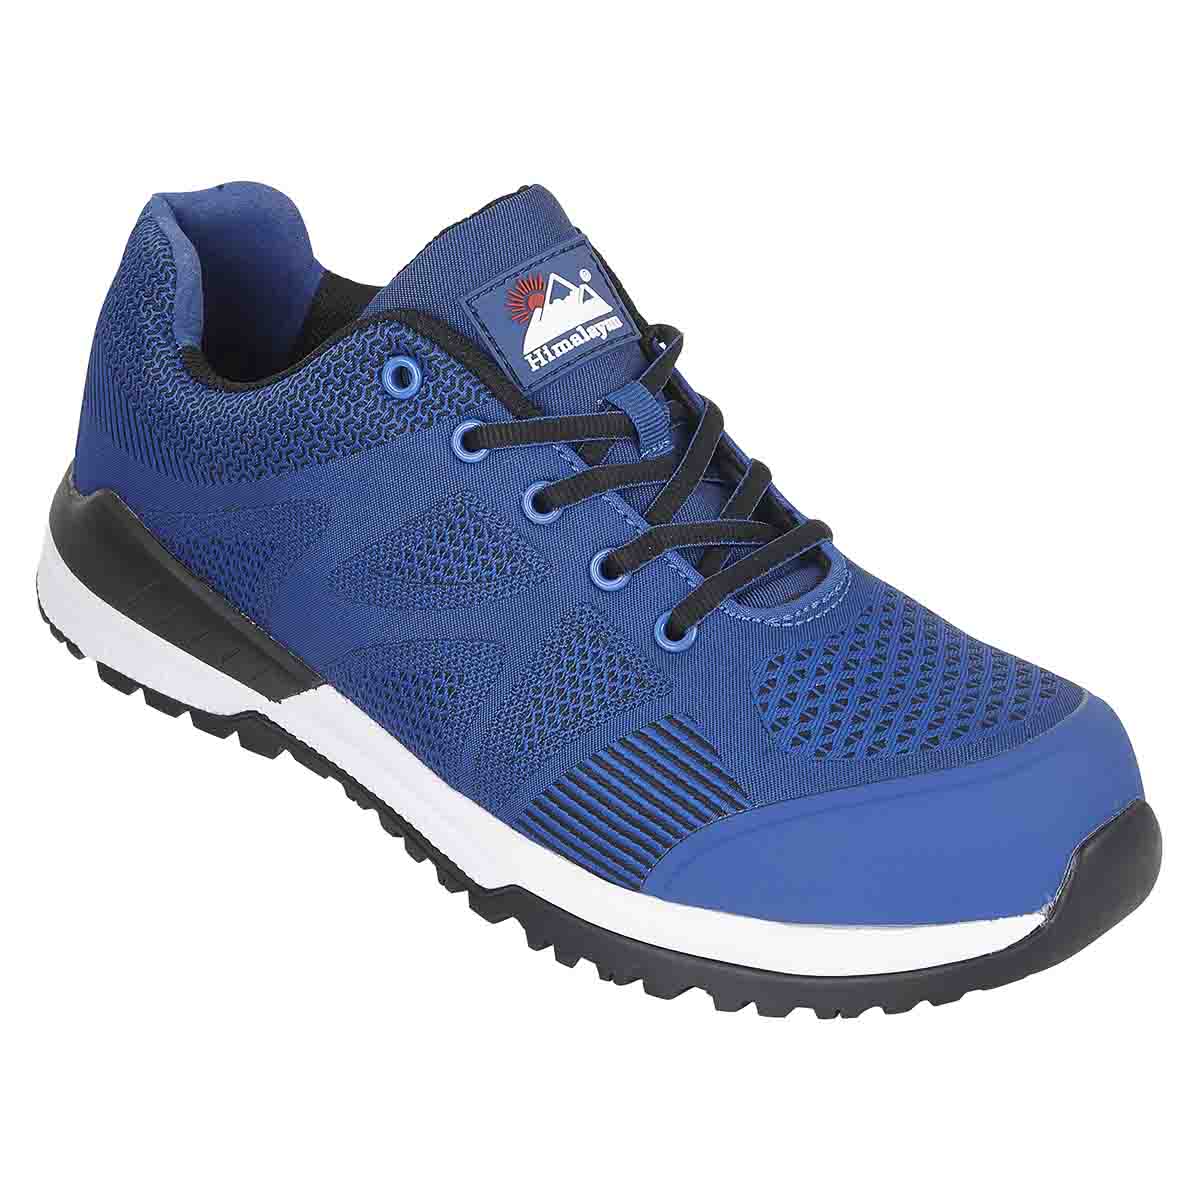 Himalayan 4310 Unisex Blue Toe Capped Safety Trainers, UK 4, EU 37